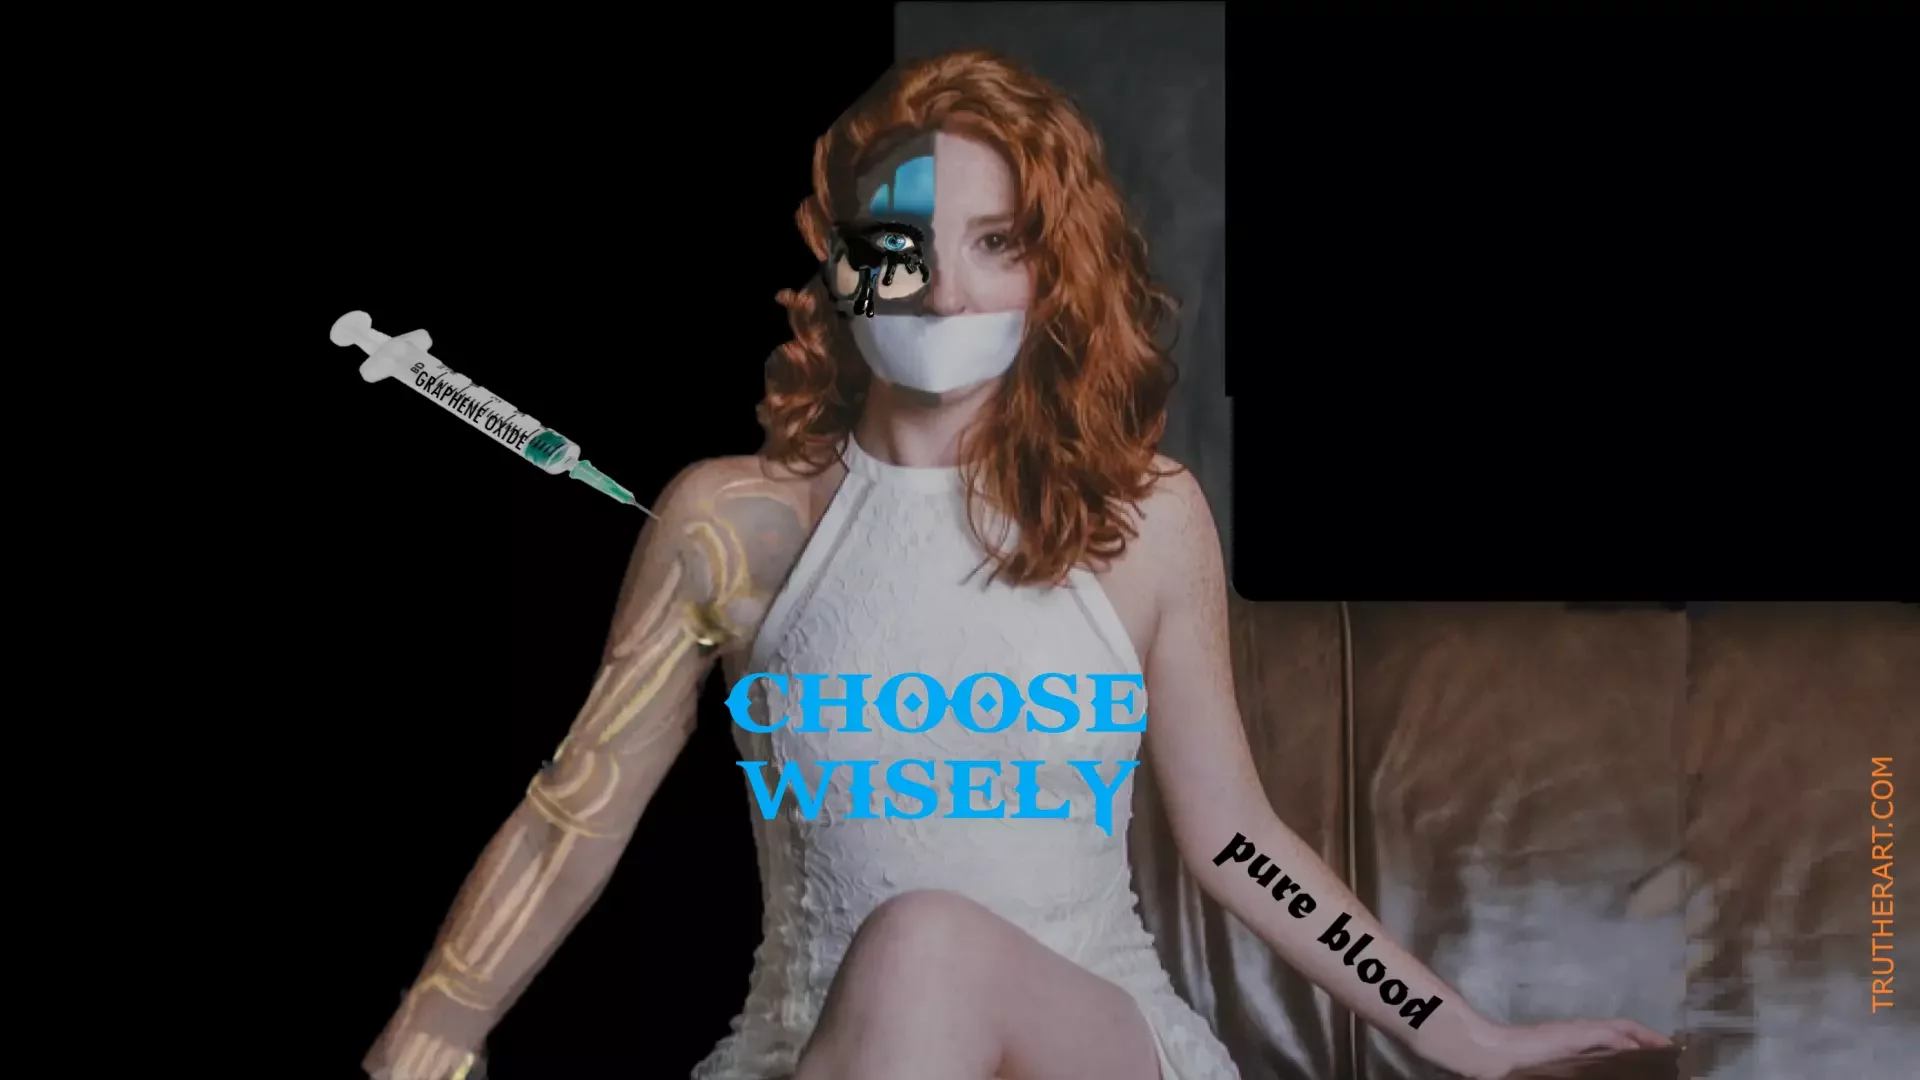  THE COVID19 VACCINE CHANGES YOUR DNA SO CHOOSE WISELY